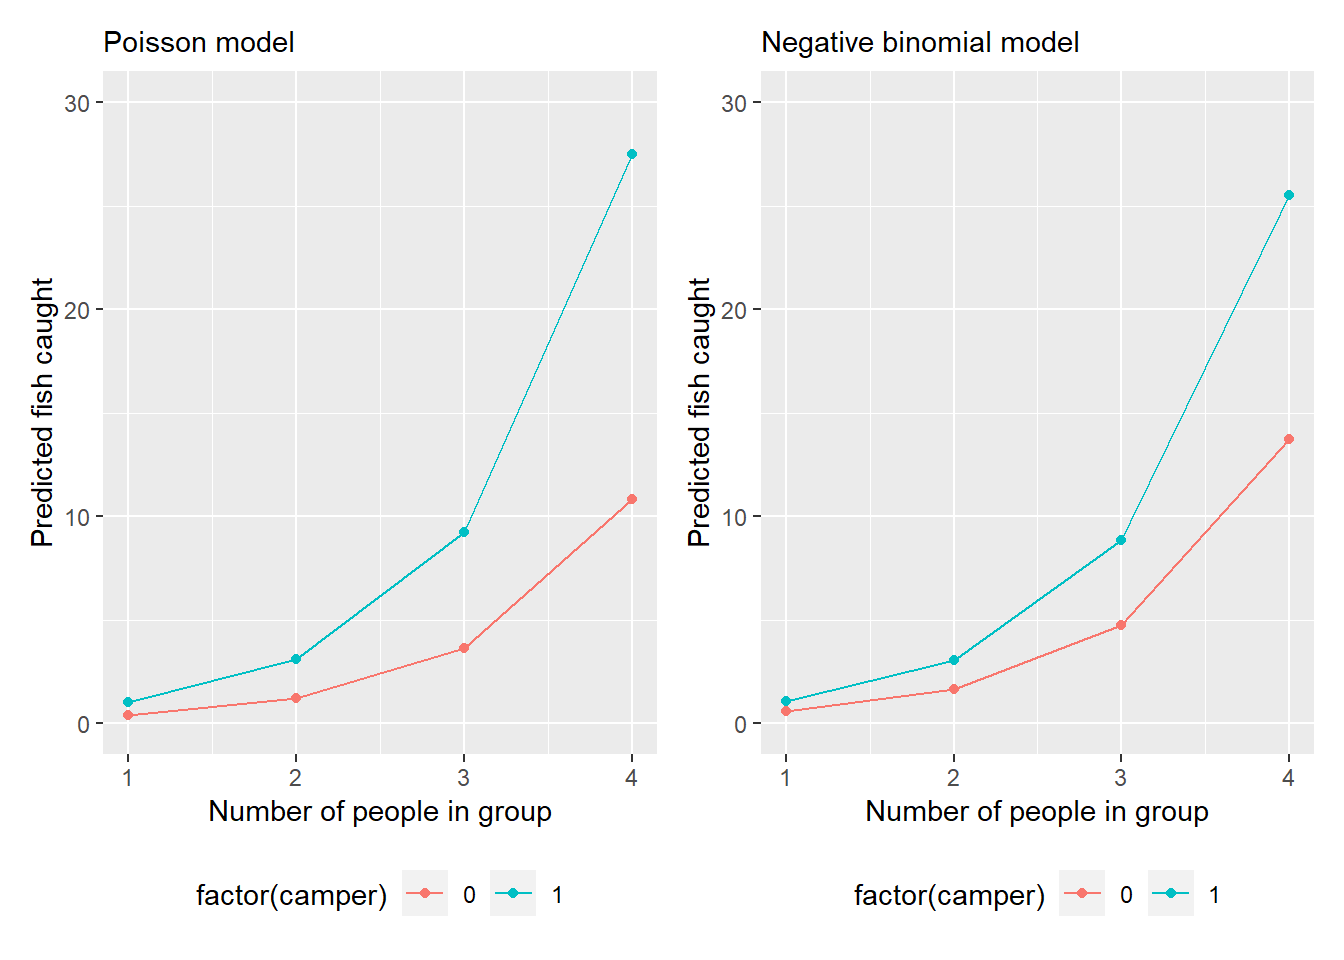 Model predictions of number of fish caught from the fishing data set.)